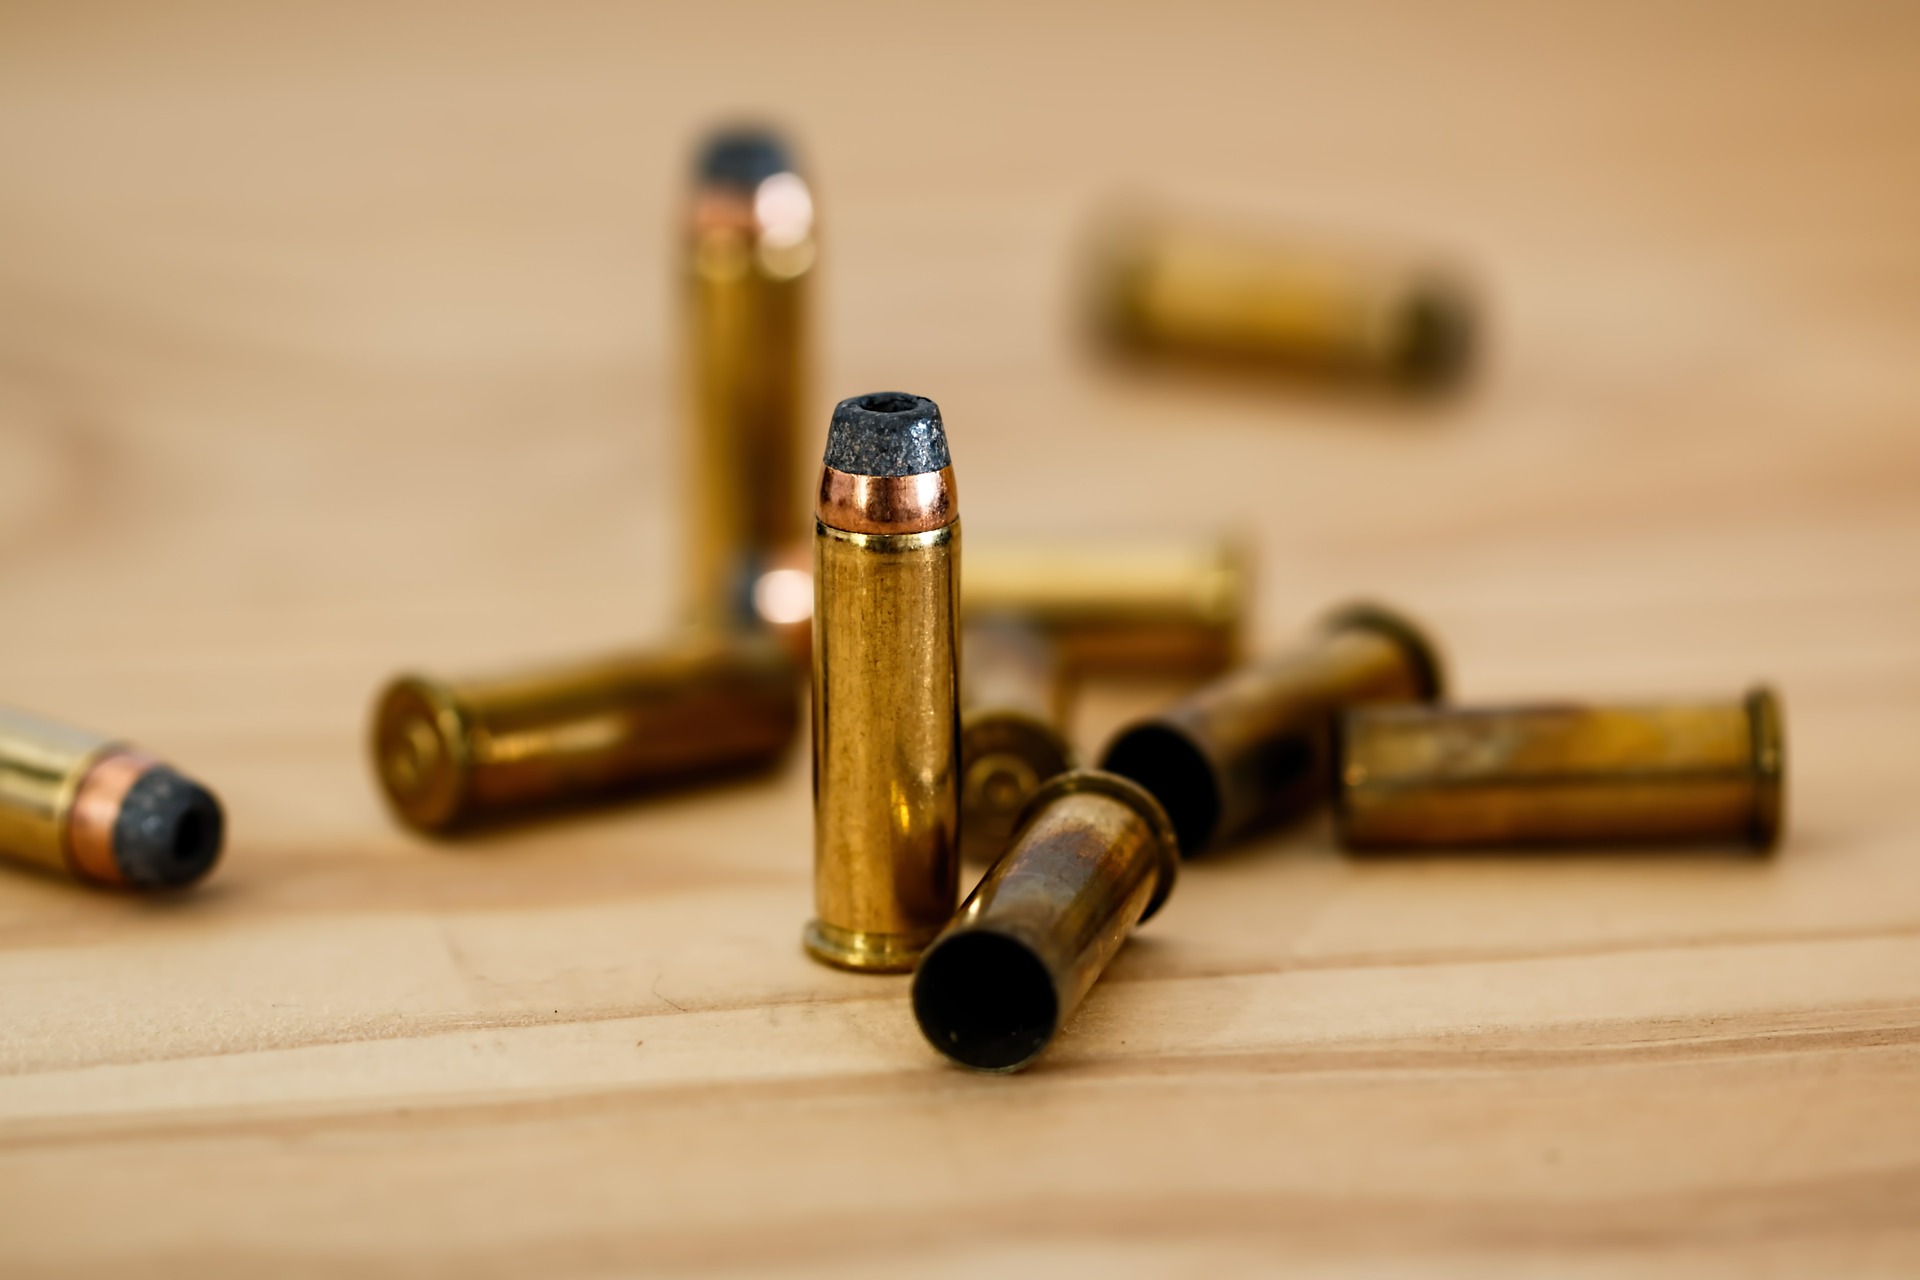 bullet-408636_1920-image-by-steve-buissinne-from-pixabay